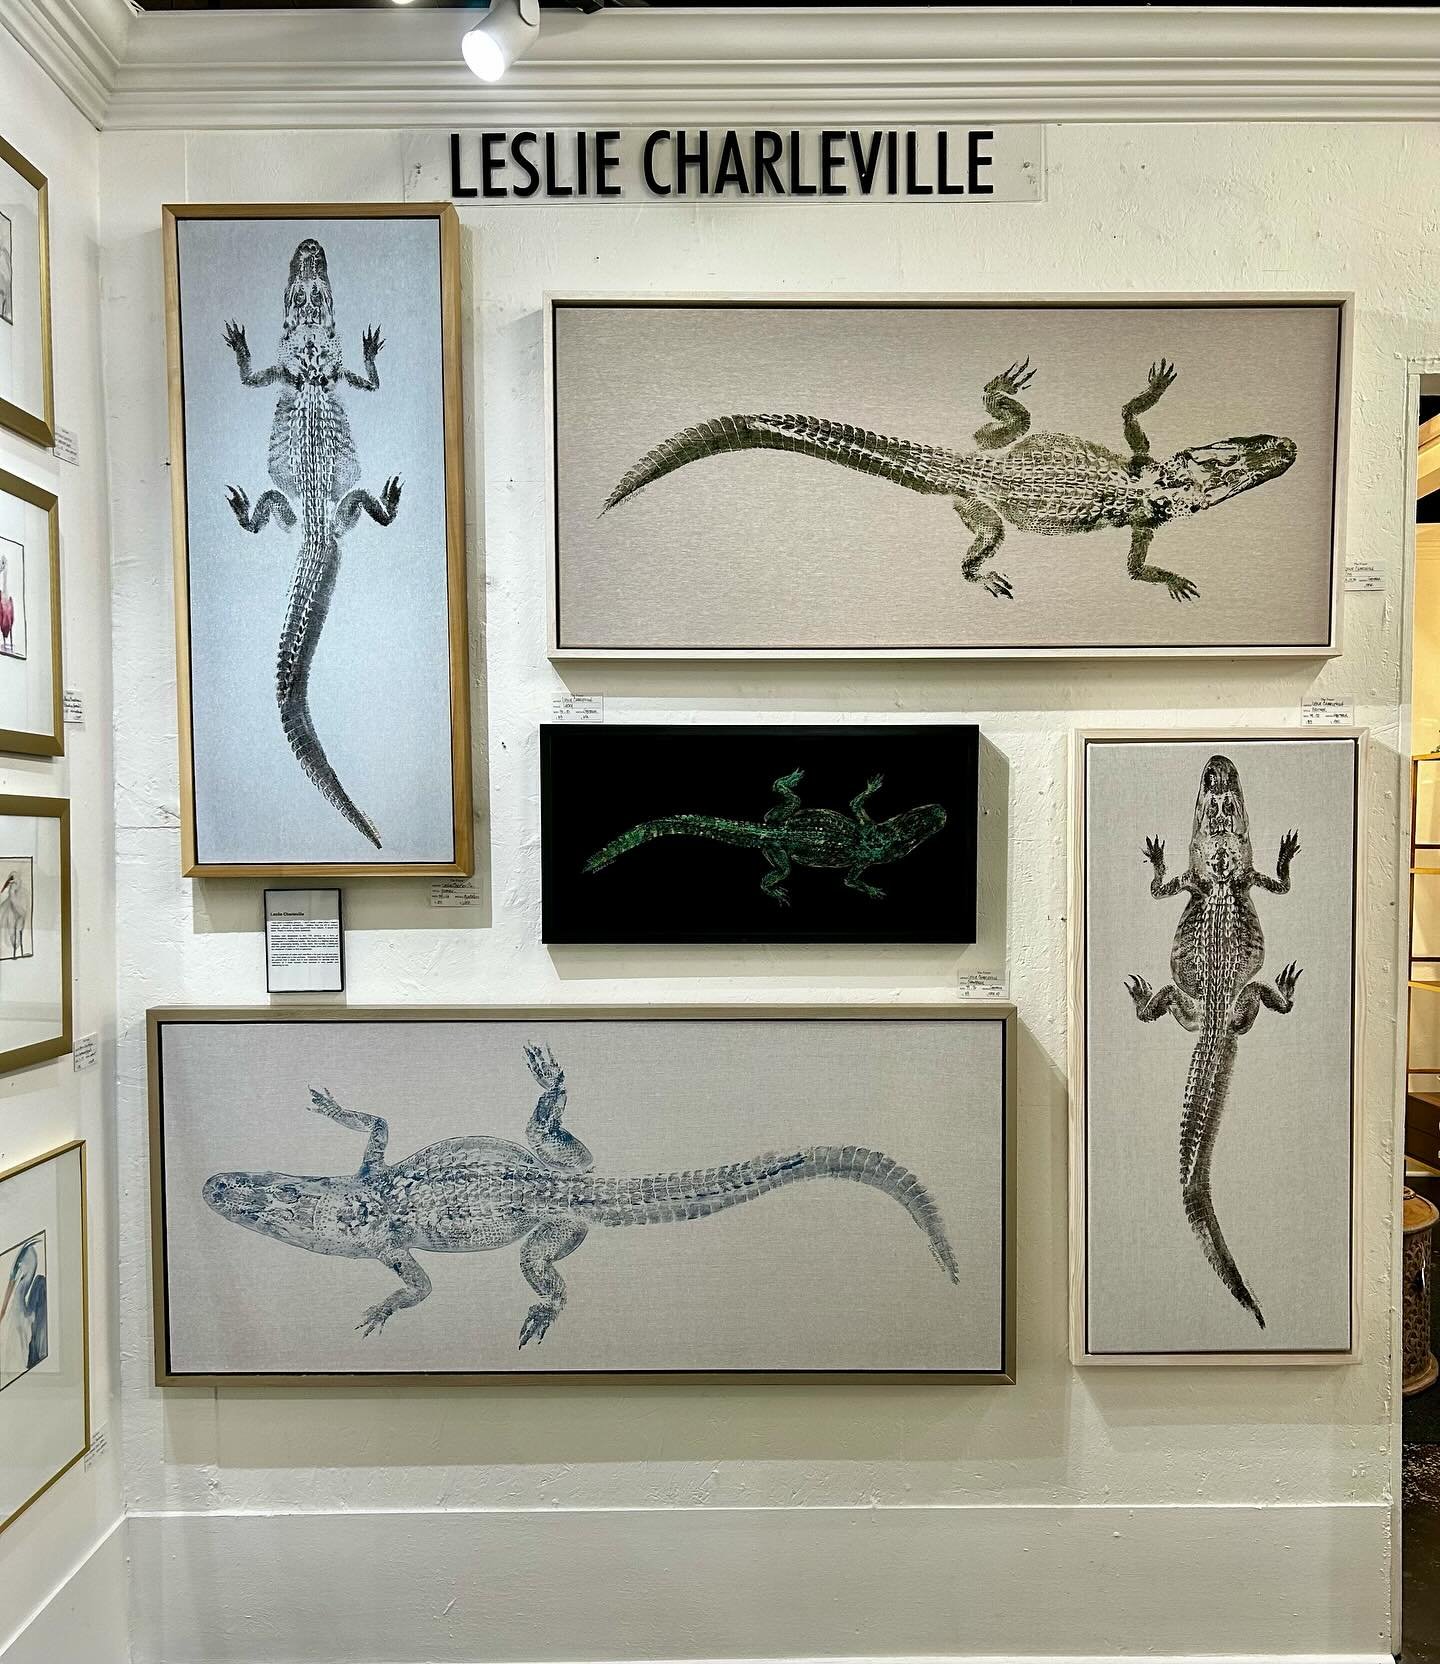 Want to add a touch of Louisiana charm to your home decor? @thefoyerbr in Baton Rouge is officially restocked with a fresh batch of L Charleville Studios gators, eagerly waiting to be adopted into their forever homes! 🐊✨

#ArtDecor #HomeDecor #Allig